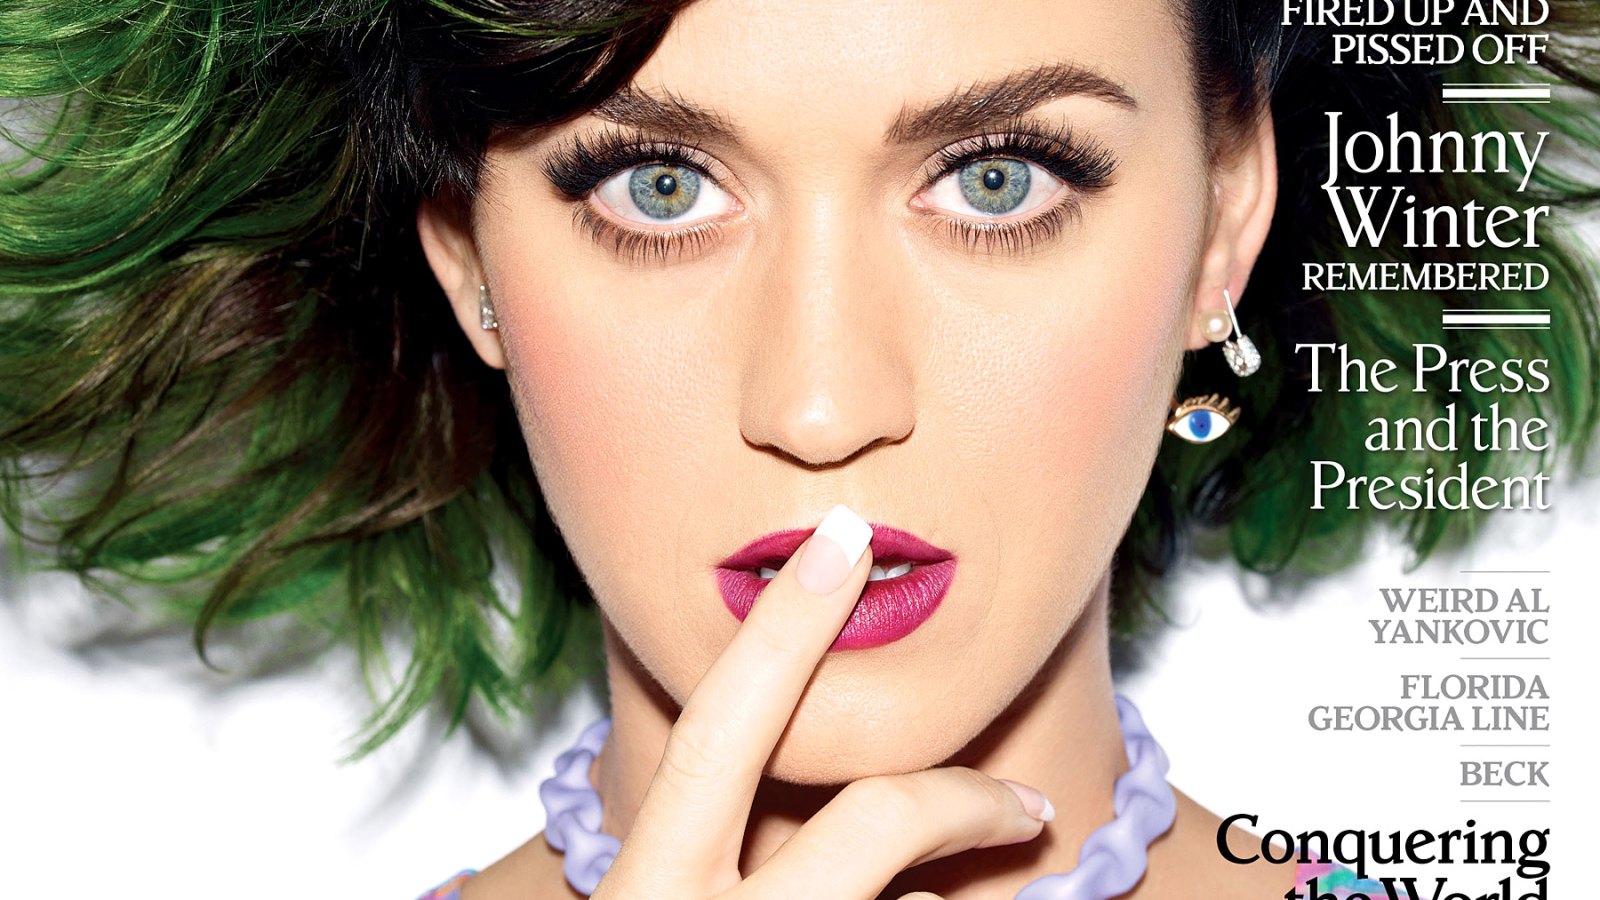 Katy Perry on the cover of Rolling Stone